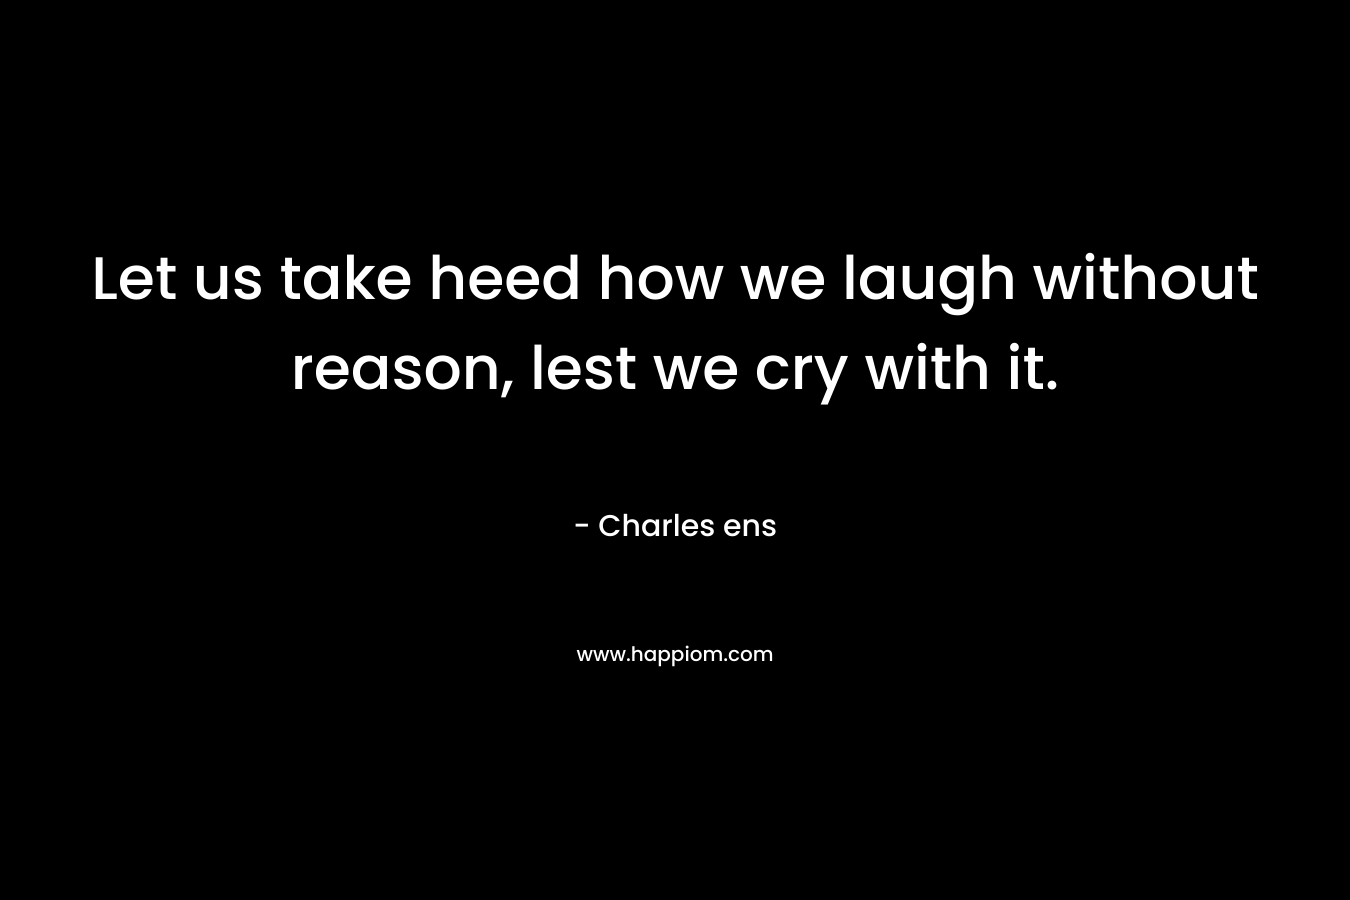 Let us take heed how we laugh without reason, lest we cry with it.